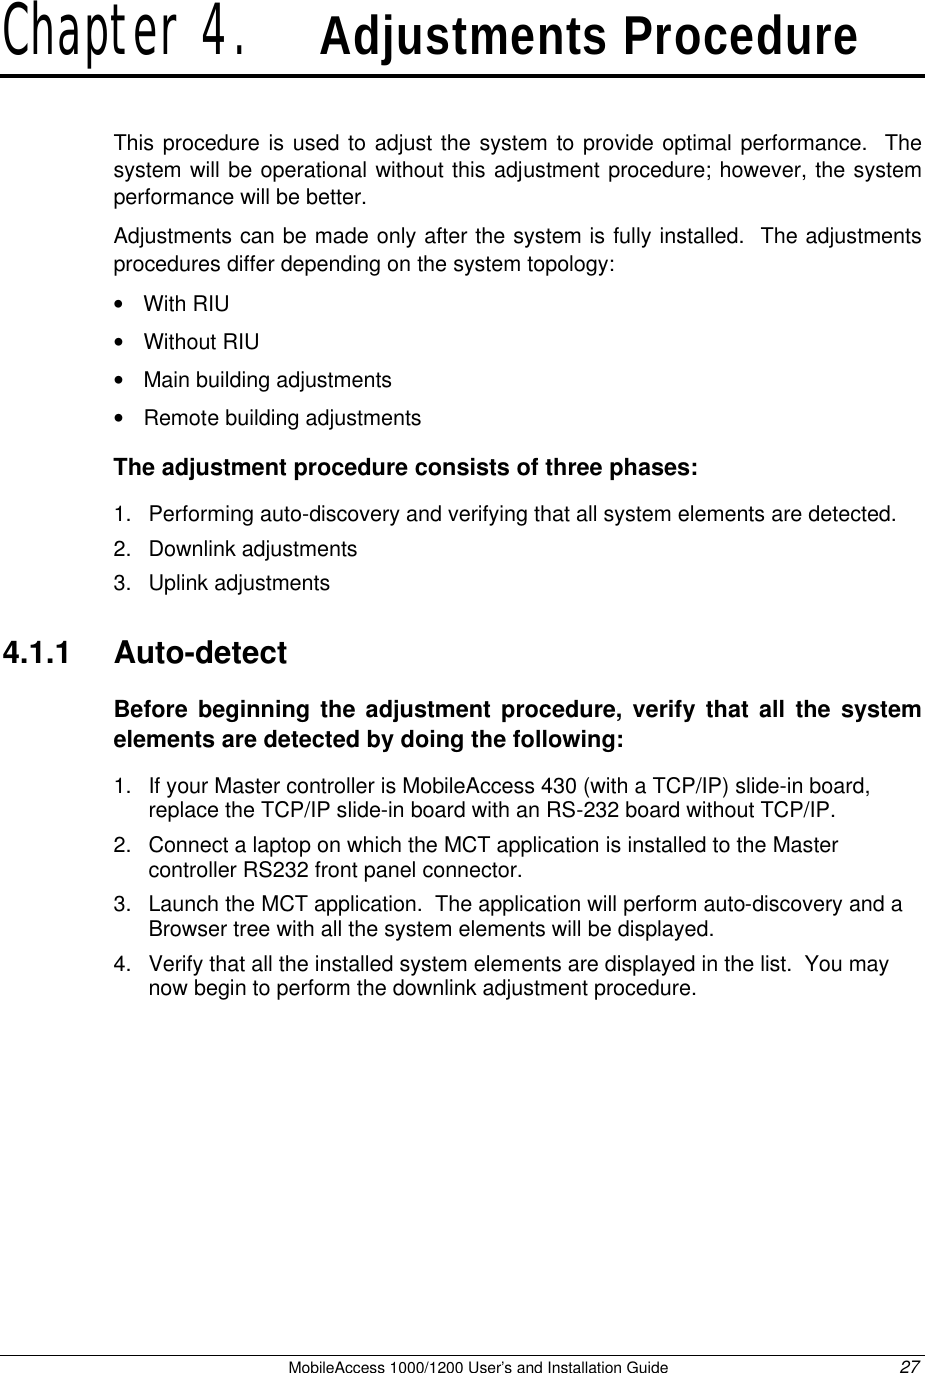   MobileAccess 1000/1200 User’s and Installation Guide 27 Chapter 4.   Adjustments Procedure This procedure is used to adjust the system to provide optimal performance.  The system will be operational without this adjustment procedure; however, the system performance will be better.   Adjustments can be made only after the system is fully installed.  The adjustments procedures differ depending on the system topology: • With RIU • Without RIU • Main building adjustments • Remote building adjustments The adjustment procedure consists of three phases: 1. Performing auto-discovery and verifying that all system elements are detected.  2. Downlink adjustments  3. Uplink adjustments  4.1.1  Auto-detect Before beginning the adjustment procedure, verify that all the system elements are detected by doing the following: 1. If your Master controller is MobileAccess 430 (with a TCP/IP) slide-in board, replace the TCP/IP slide-in board with an RS-232 board without TCP/IP. 2. Connect a laptop on which the MCT application is installed to the Master controller RS232 front panel connector.  3. Launch the MCT application.  The application will perform auto-discovery and a Browser tree with all the system elements will be displayed. 4. Verify that all the installed system elements are displayed in the list.  You may now begin to perform the downlink adjustment procedure. 